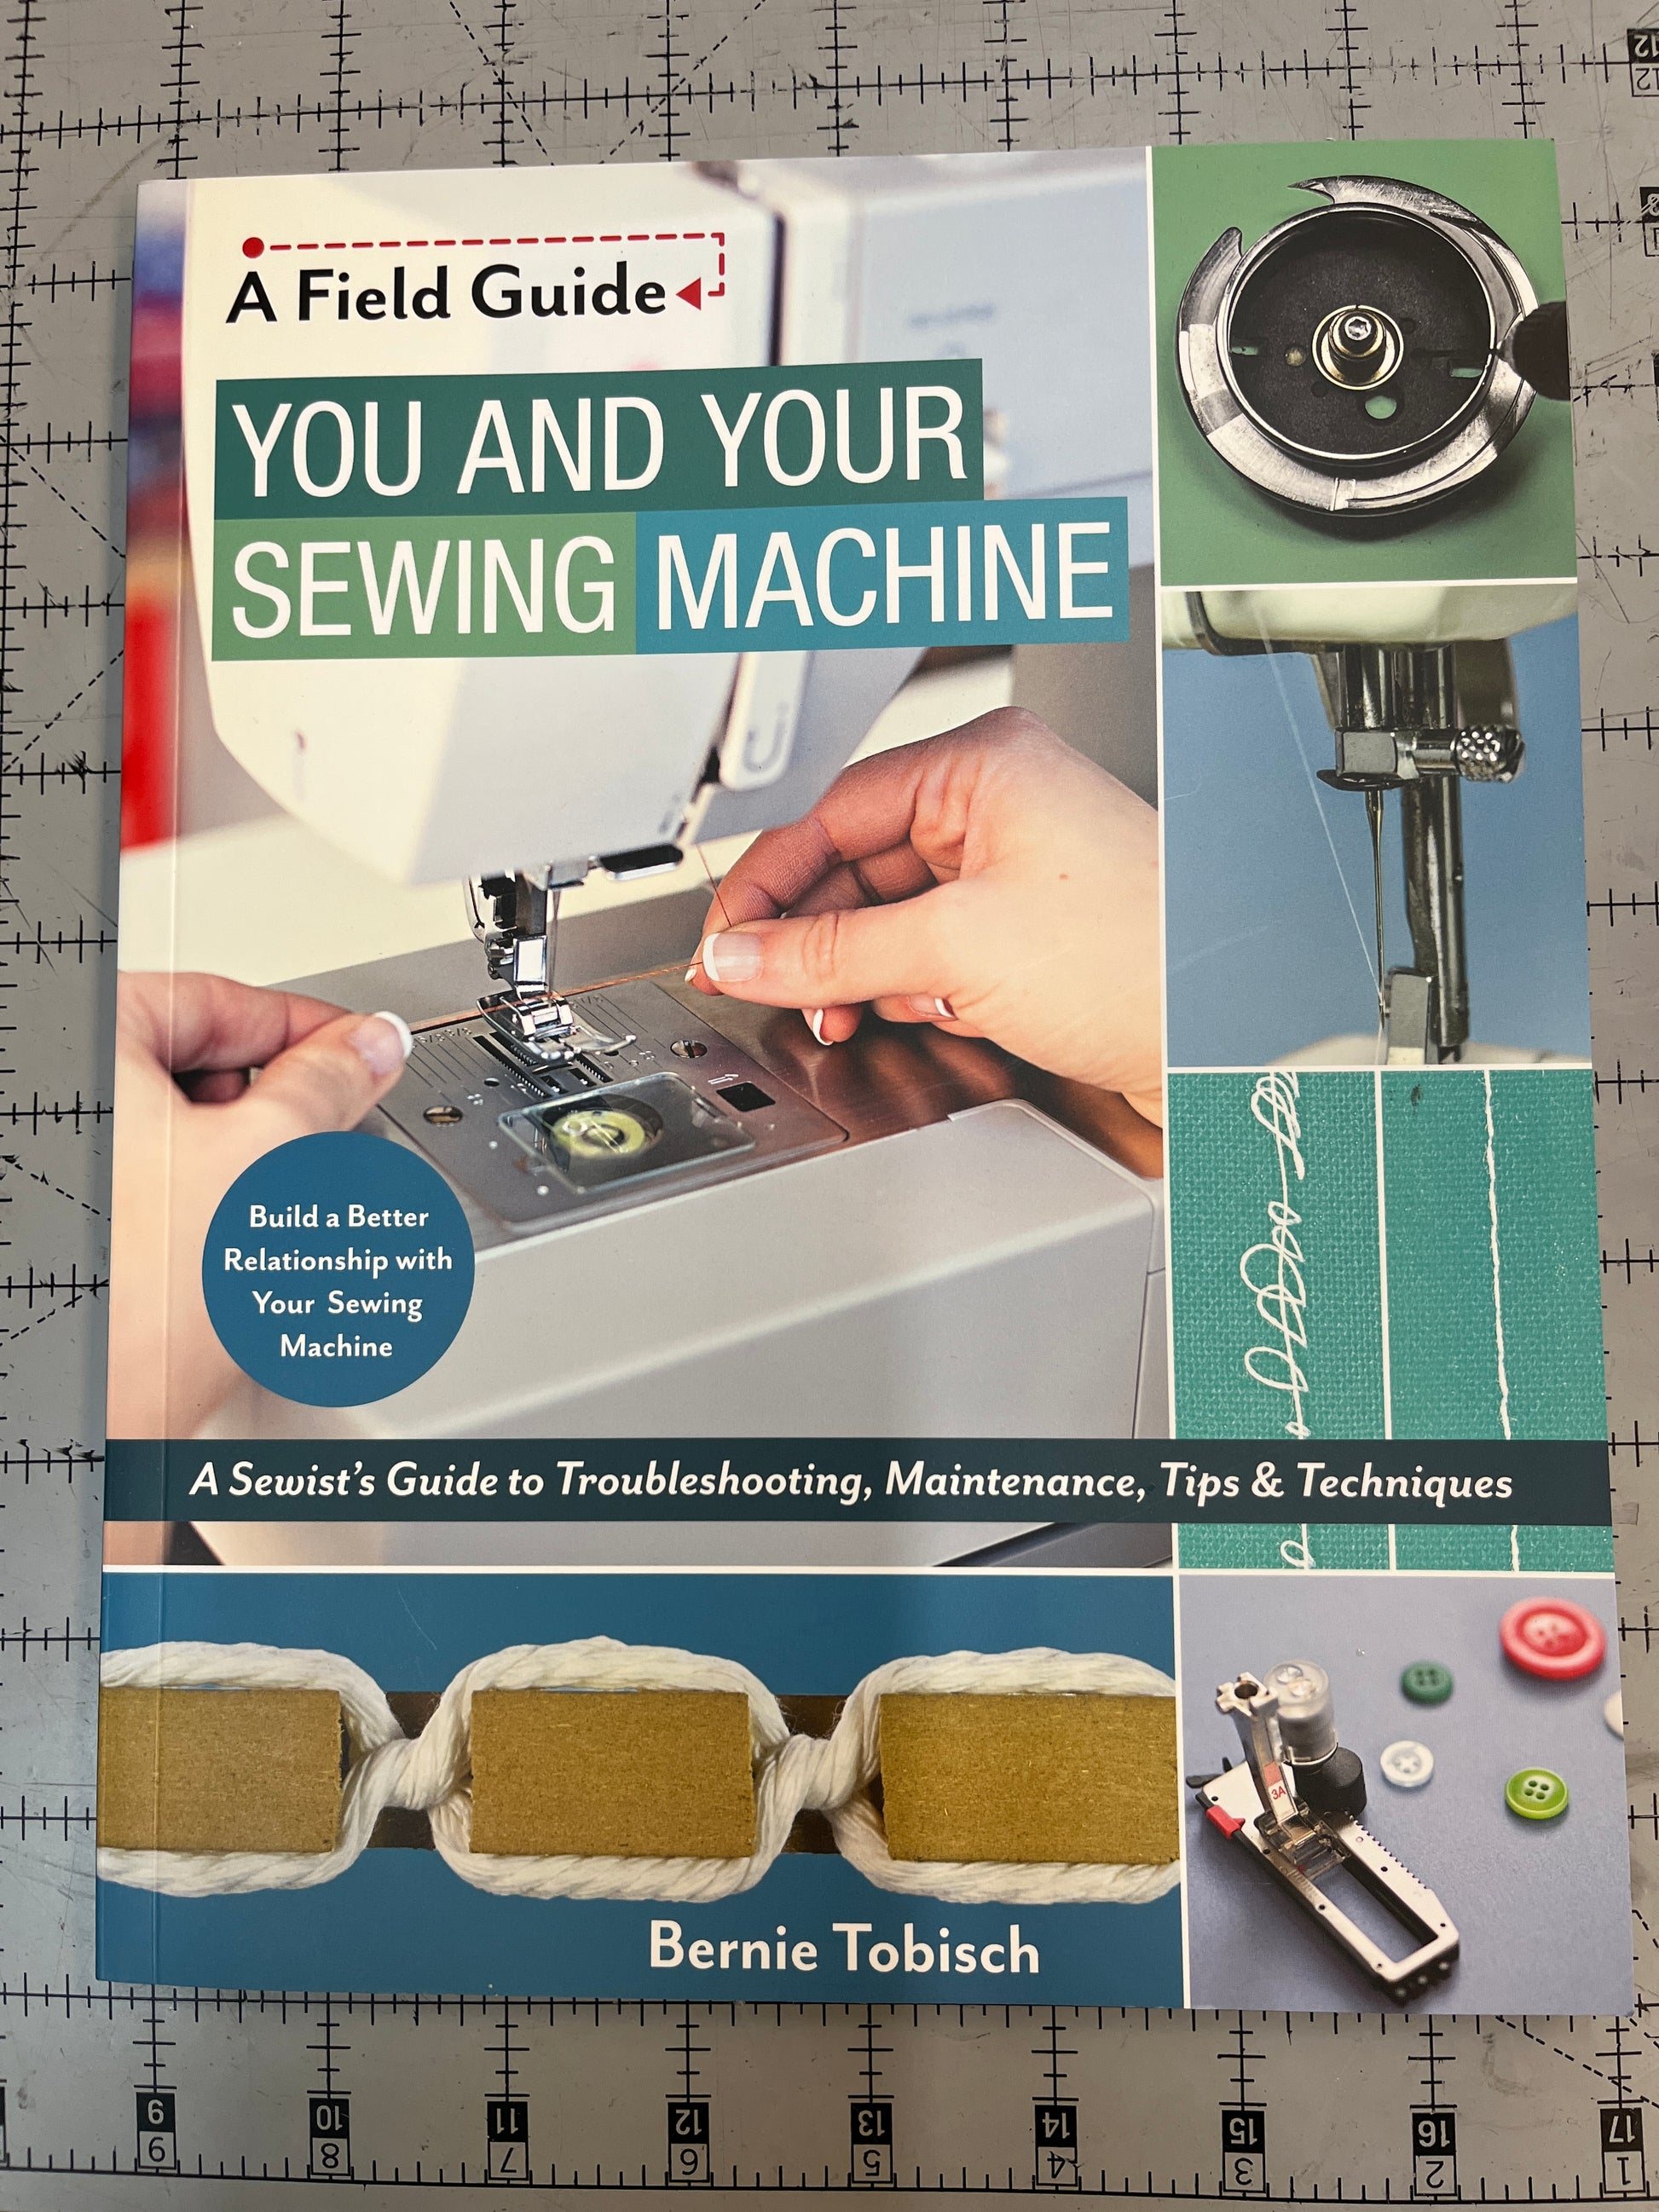 1 Sewing Machine Guide  Buy and Use a Sewing Machine